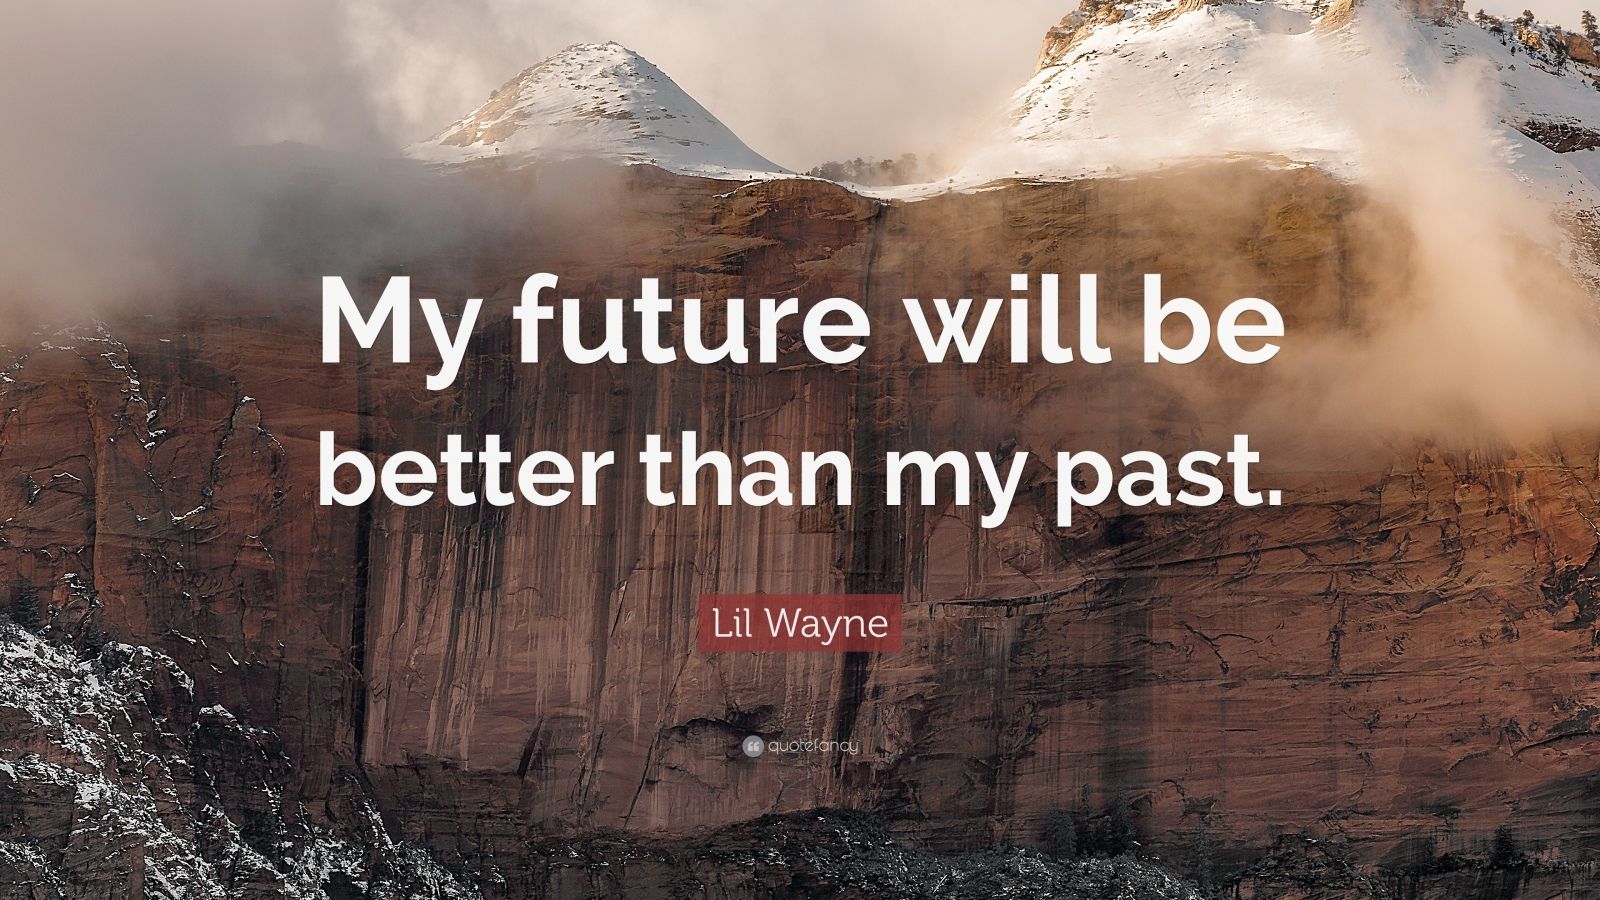 Lil Wayne Quote: “My future will be better than my past.” (12 ...